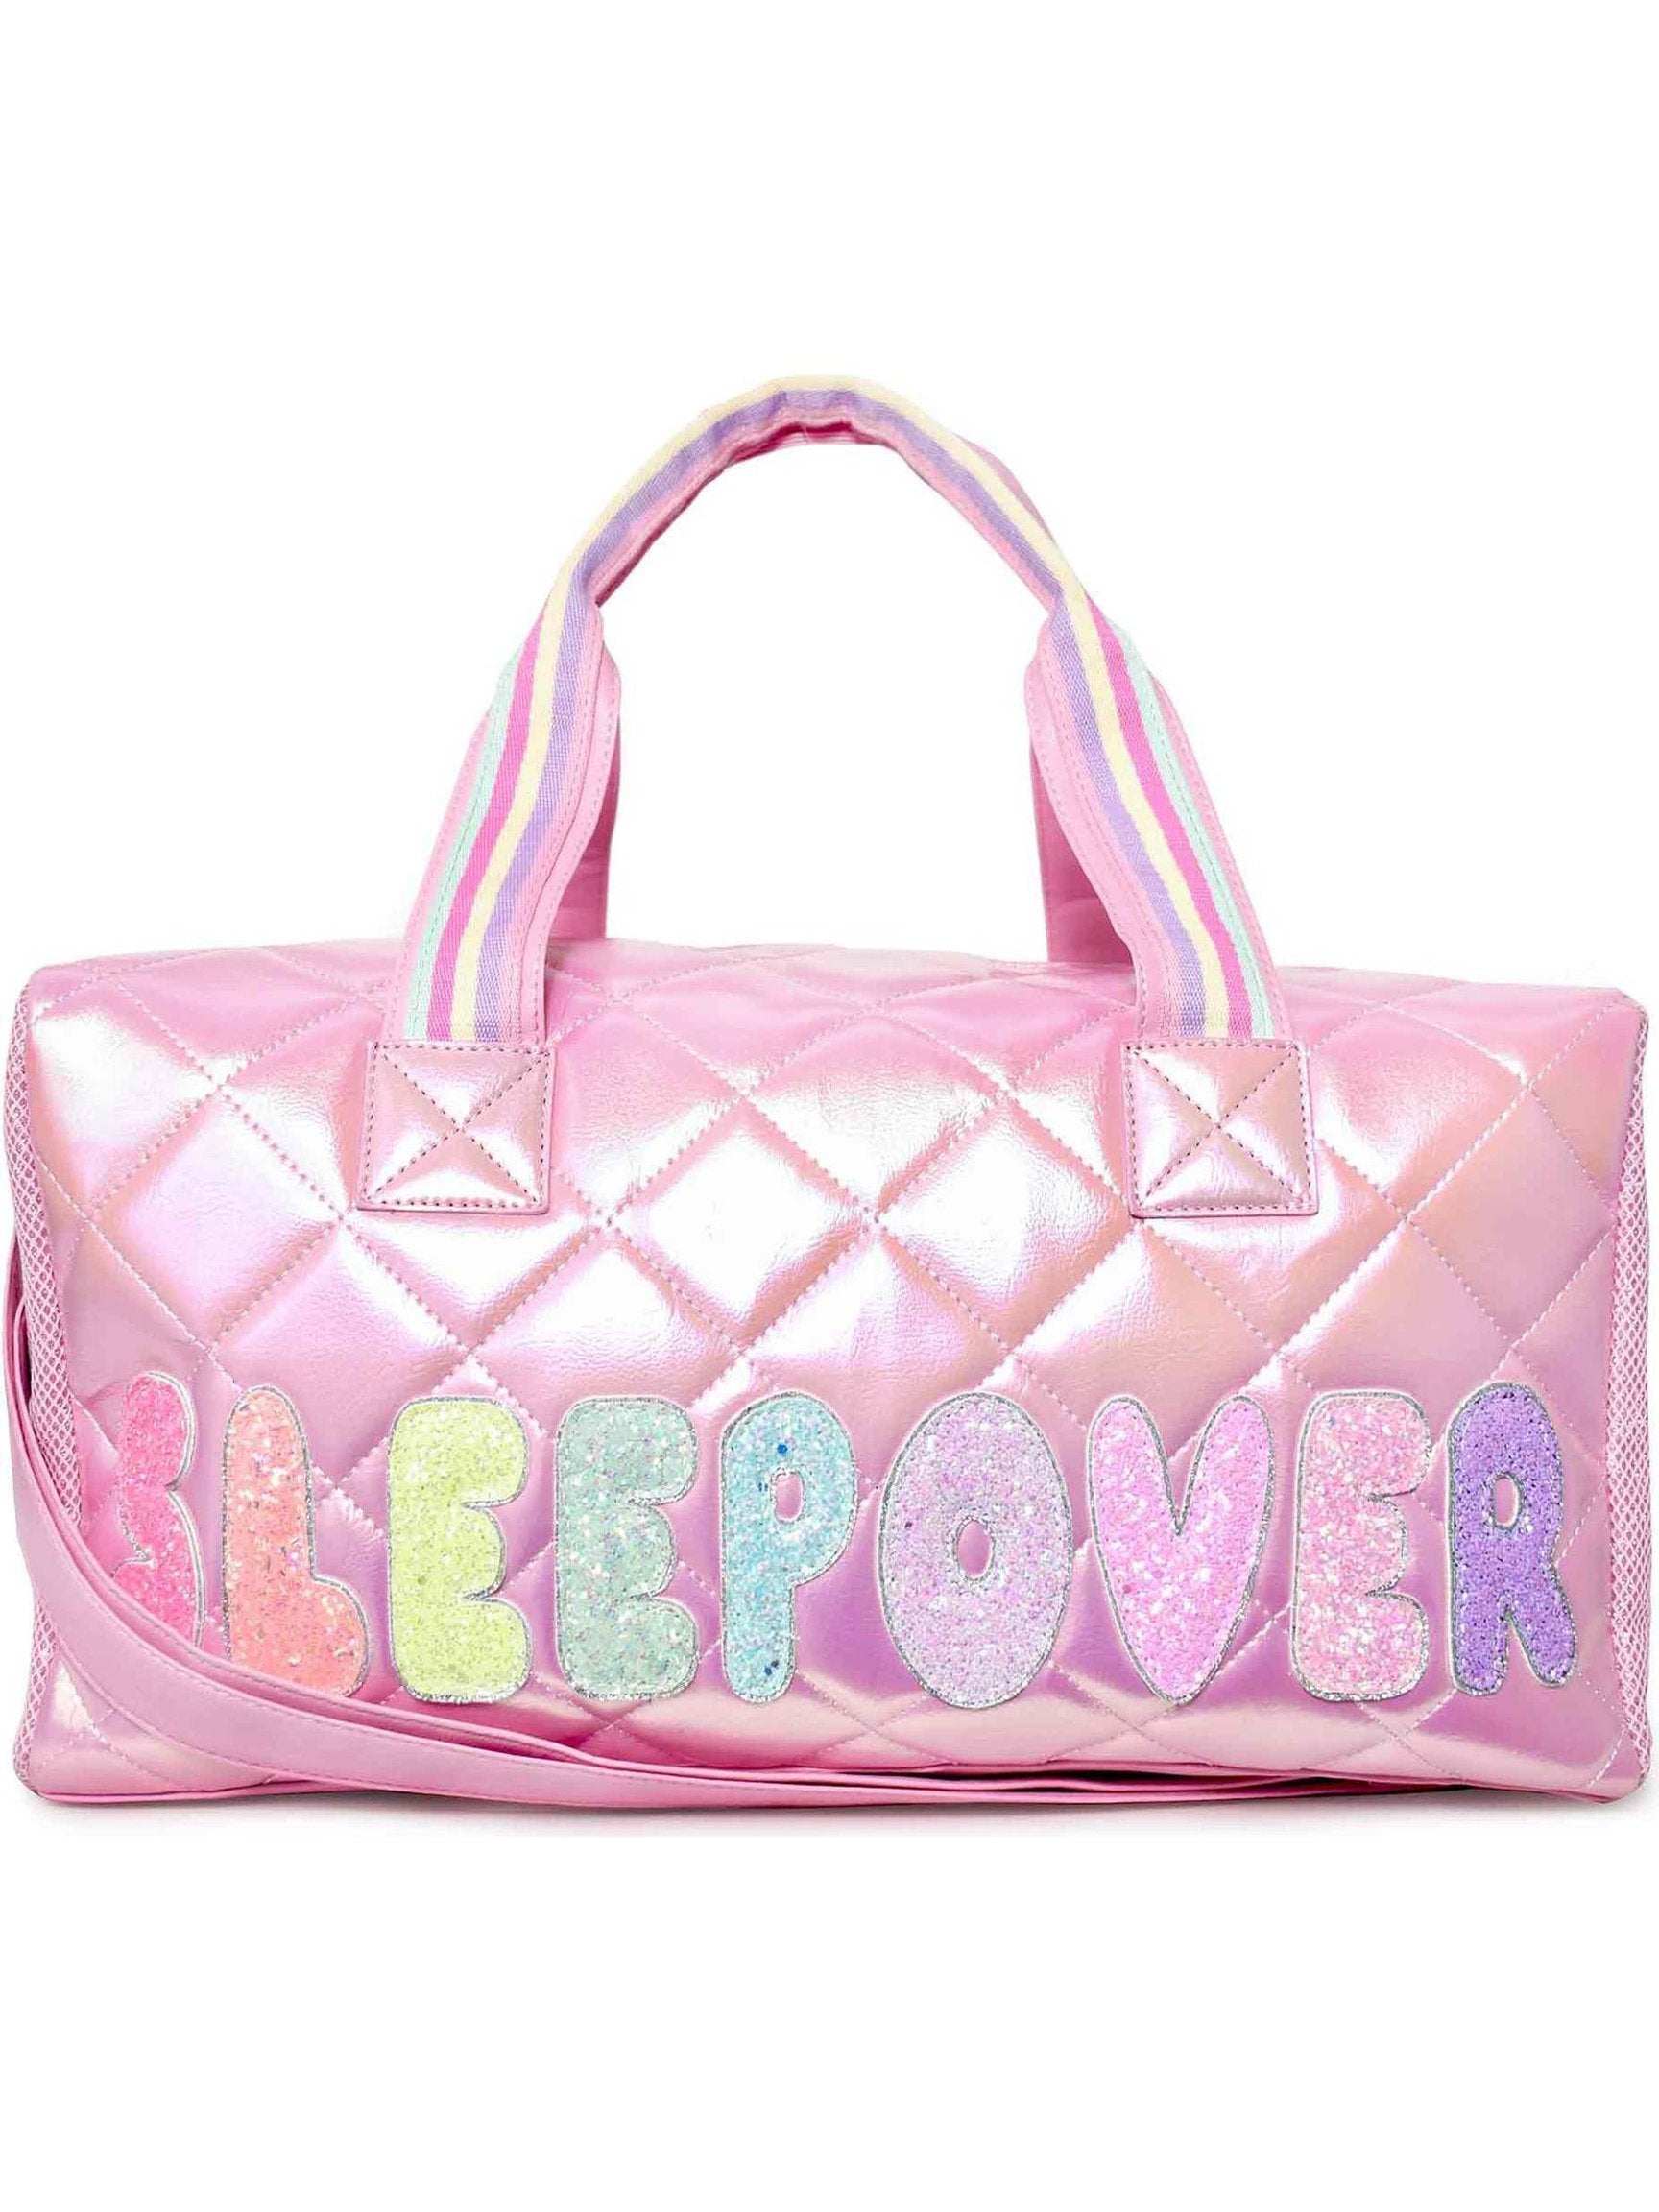 Glam Quilted Large Duffle Bag - Cotton Candy Ombre Sleepover